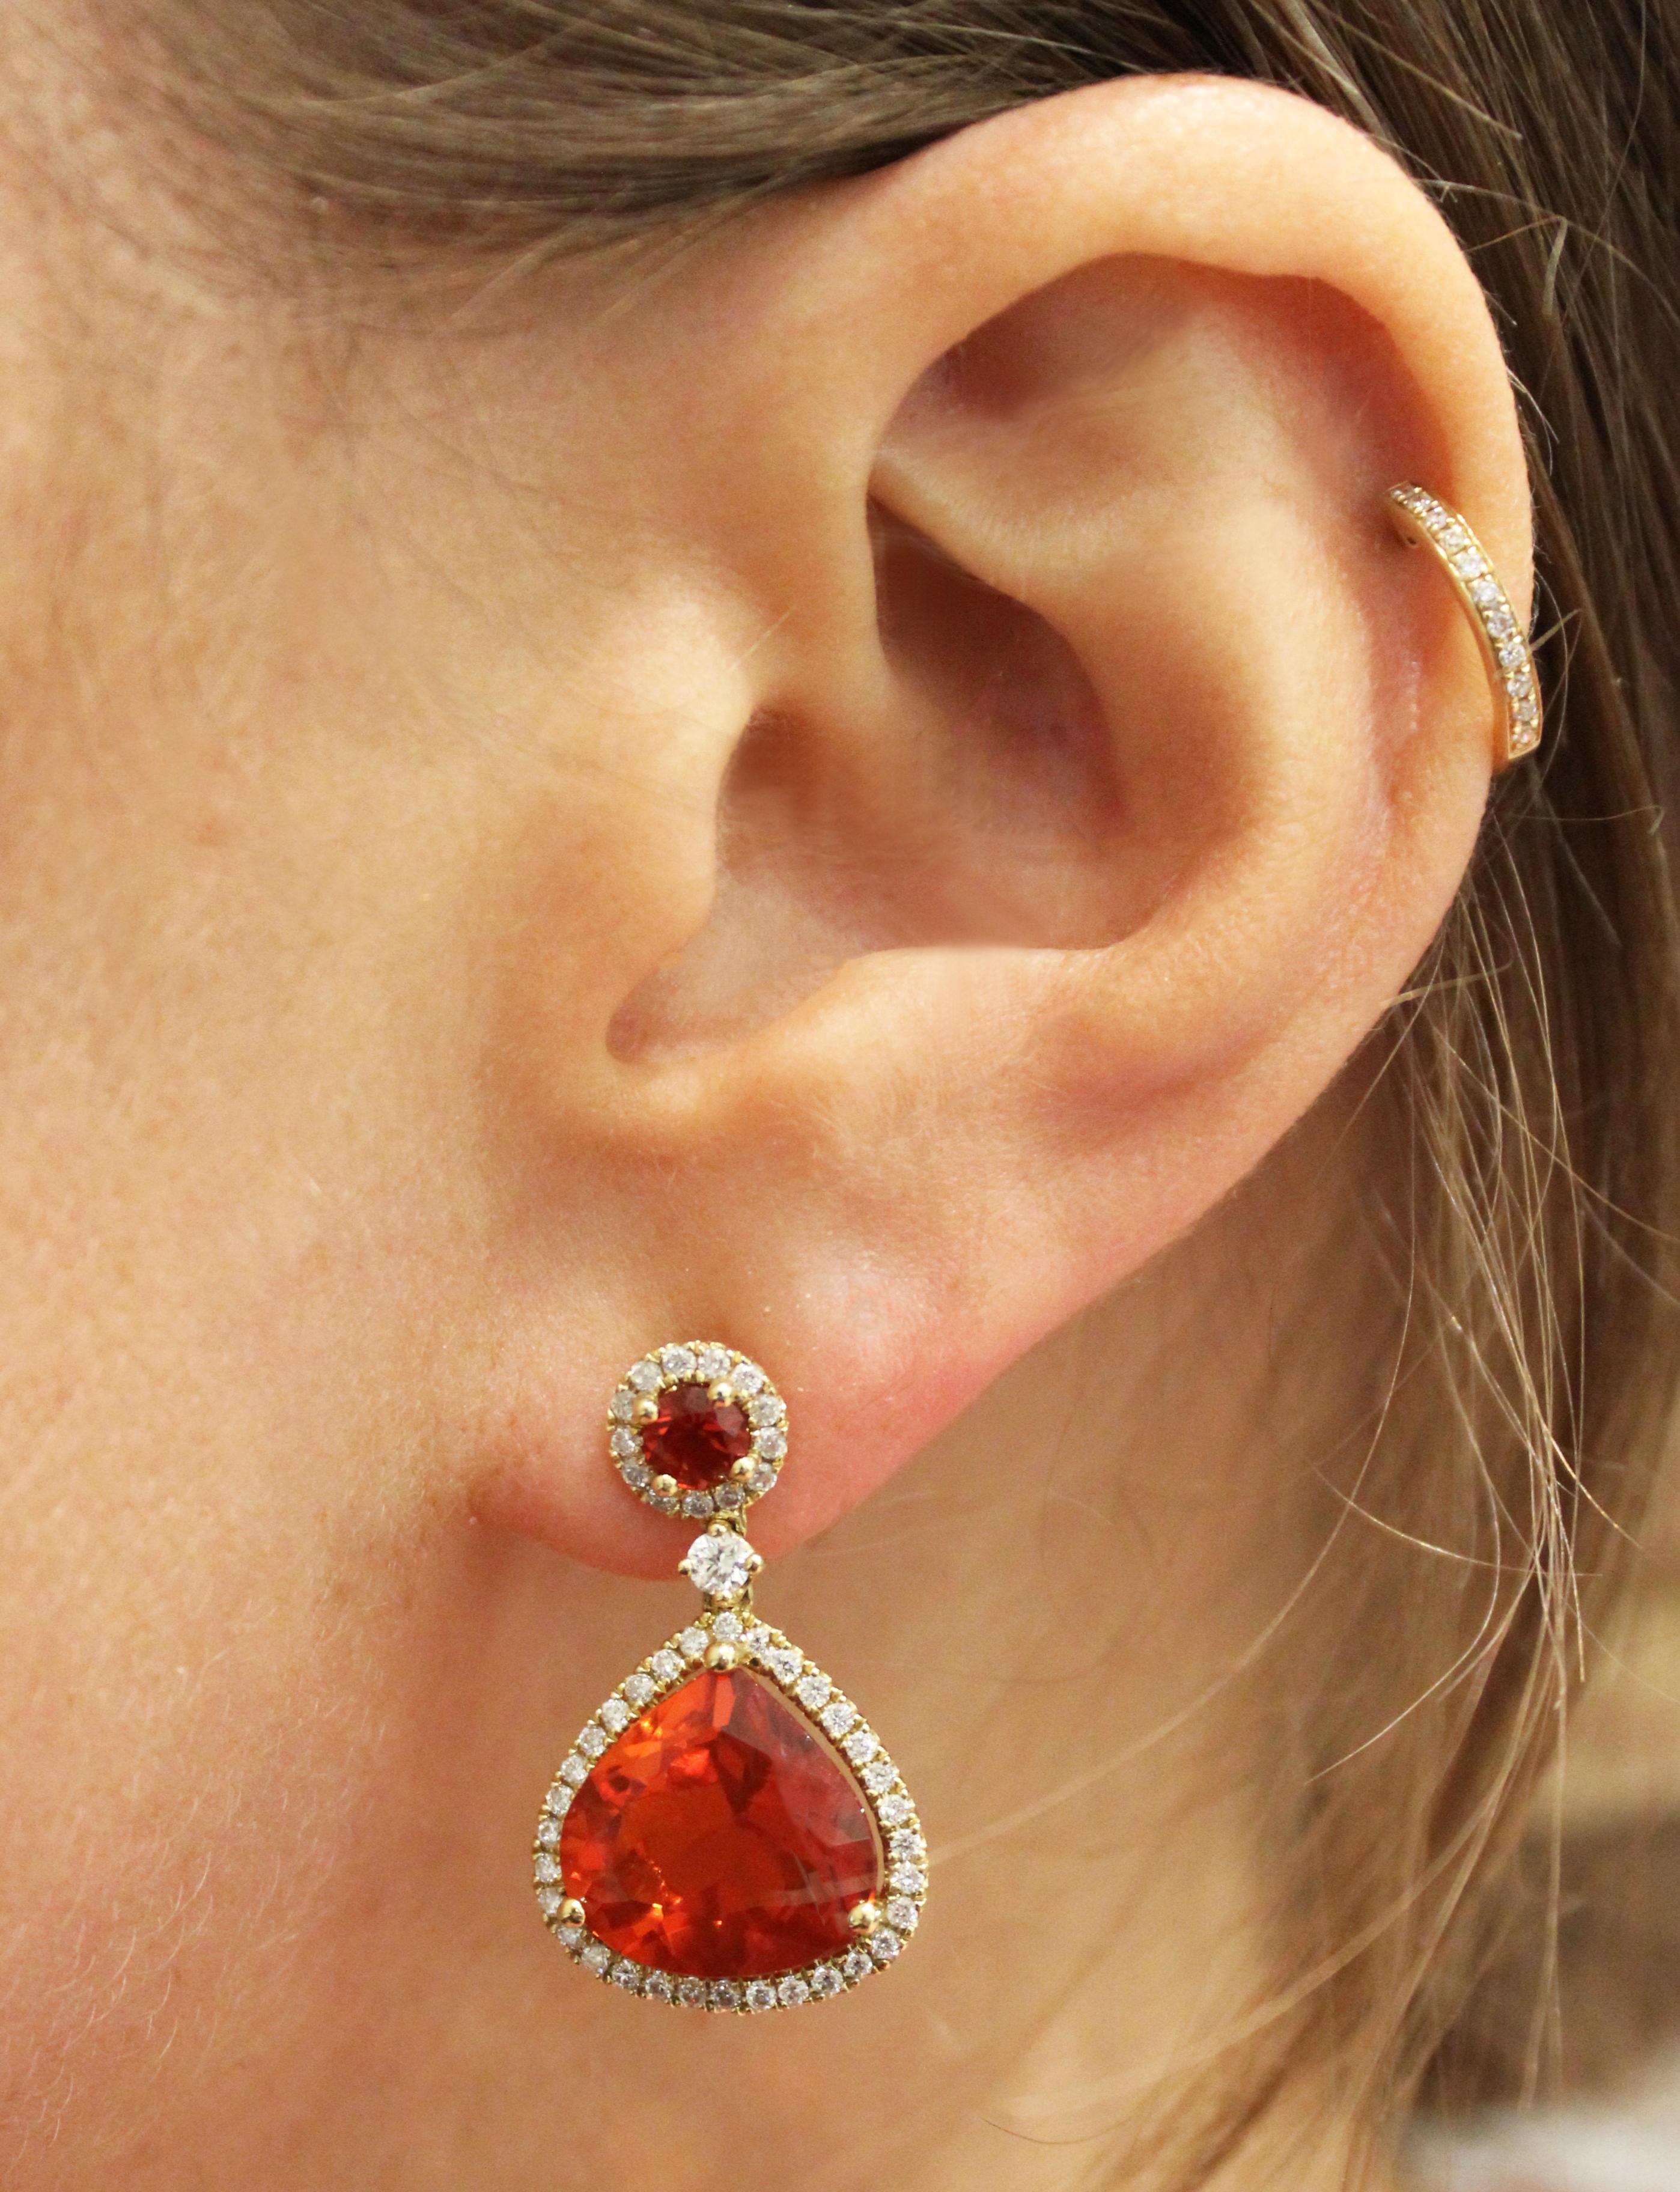 Designed in 2017 by Kiki McDonough this stunning 18ct yellow gold earrings with a large teardrop fire opal (7.70cts) surrounded by diamonds (0.85cts)with a round cut fire opal (0.33cts) top is a perfect example of the Mexican Fire Opal at its very